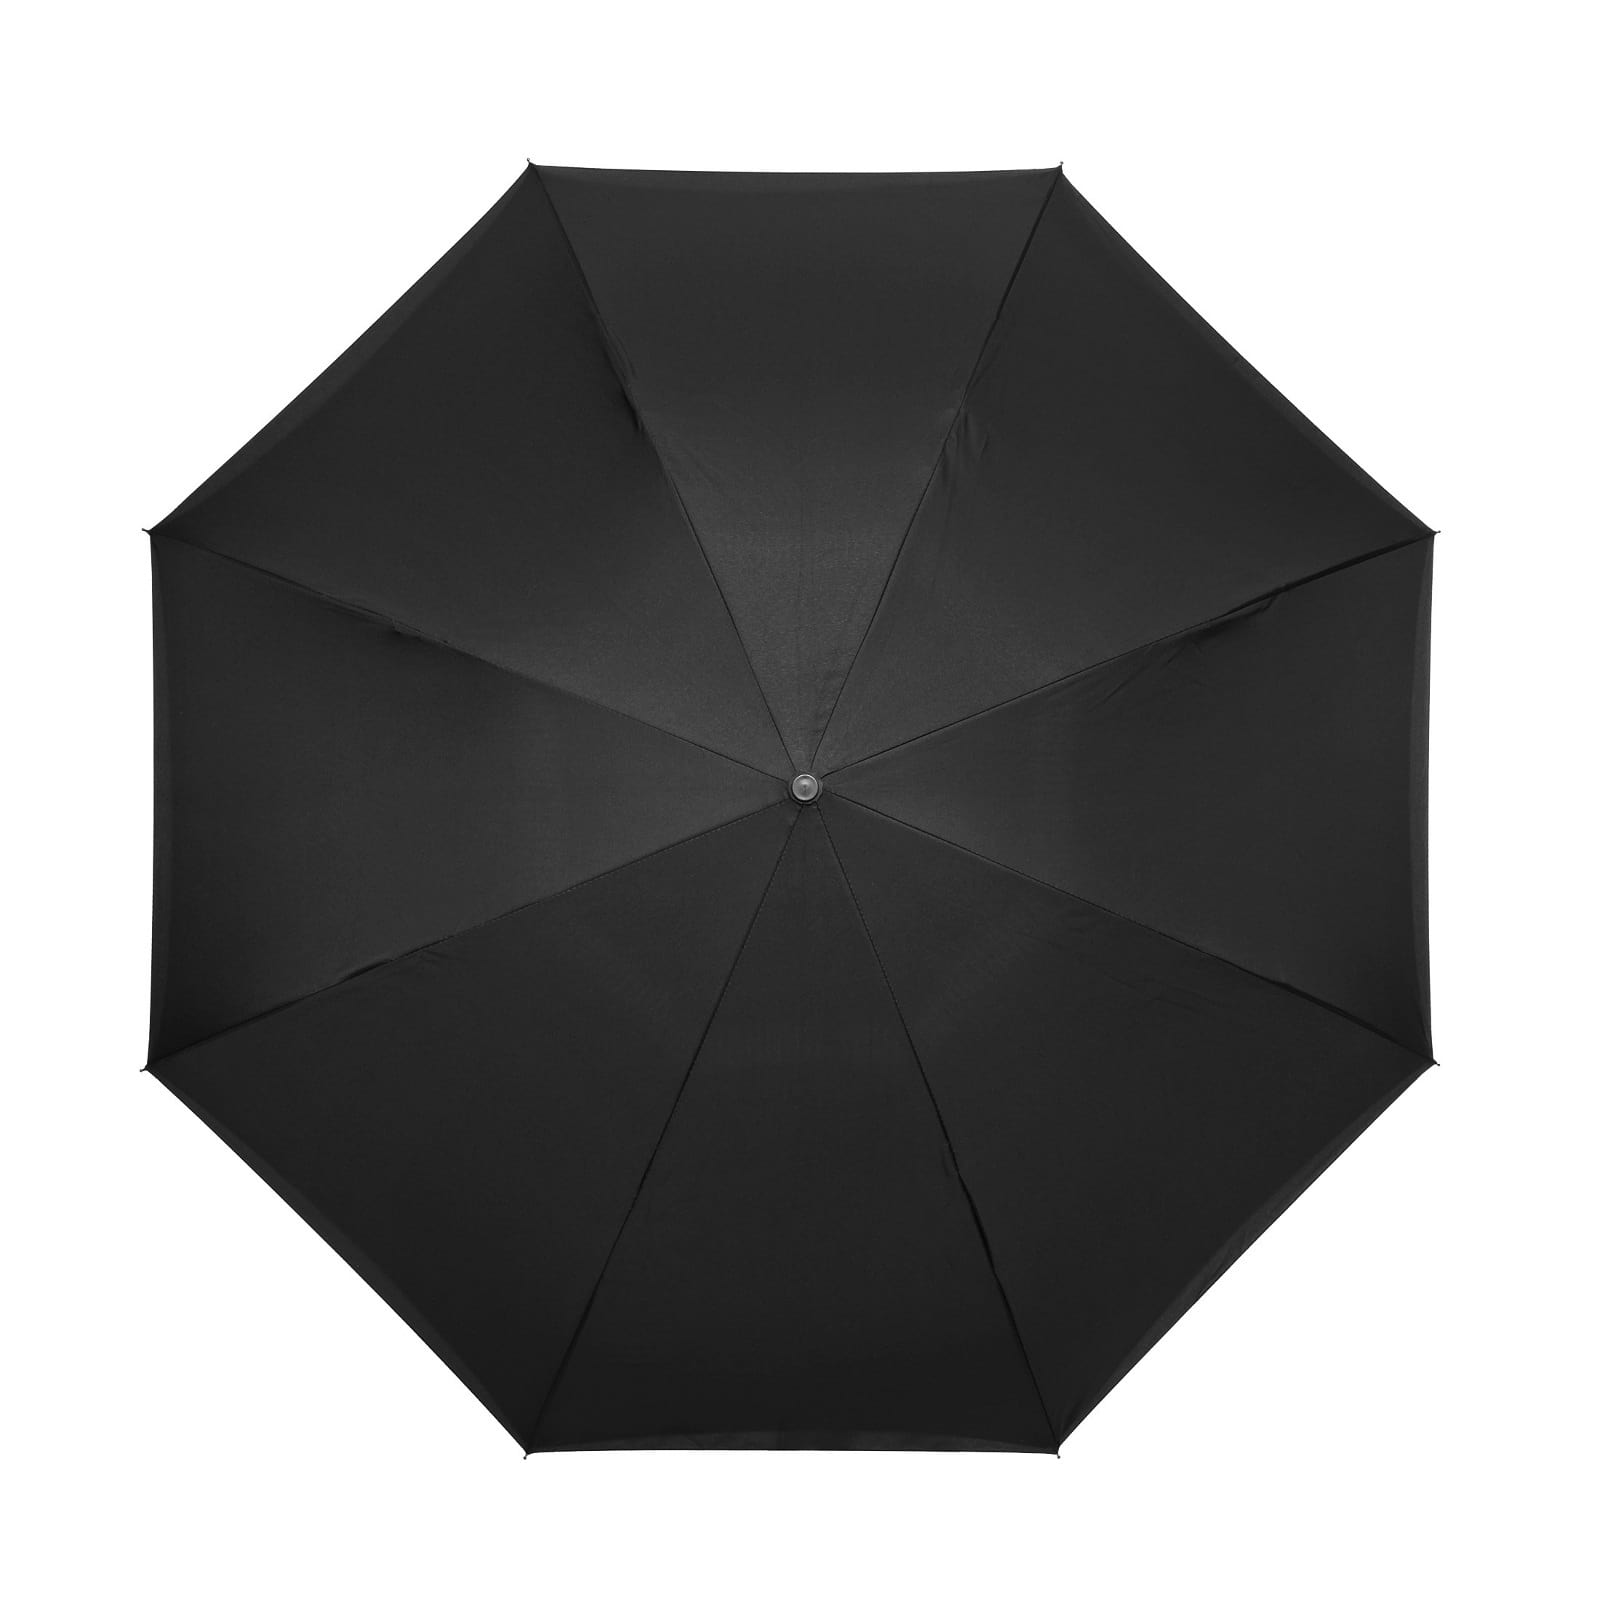 Impliva Inside Out umbrella Black / Red | Design Is This